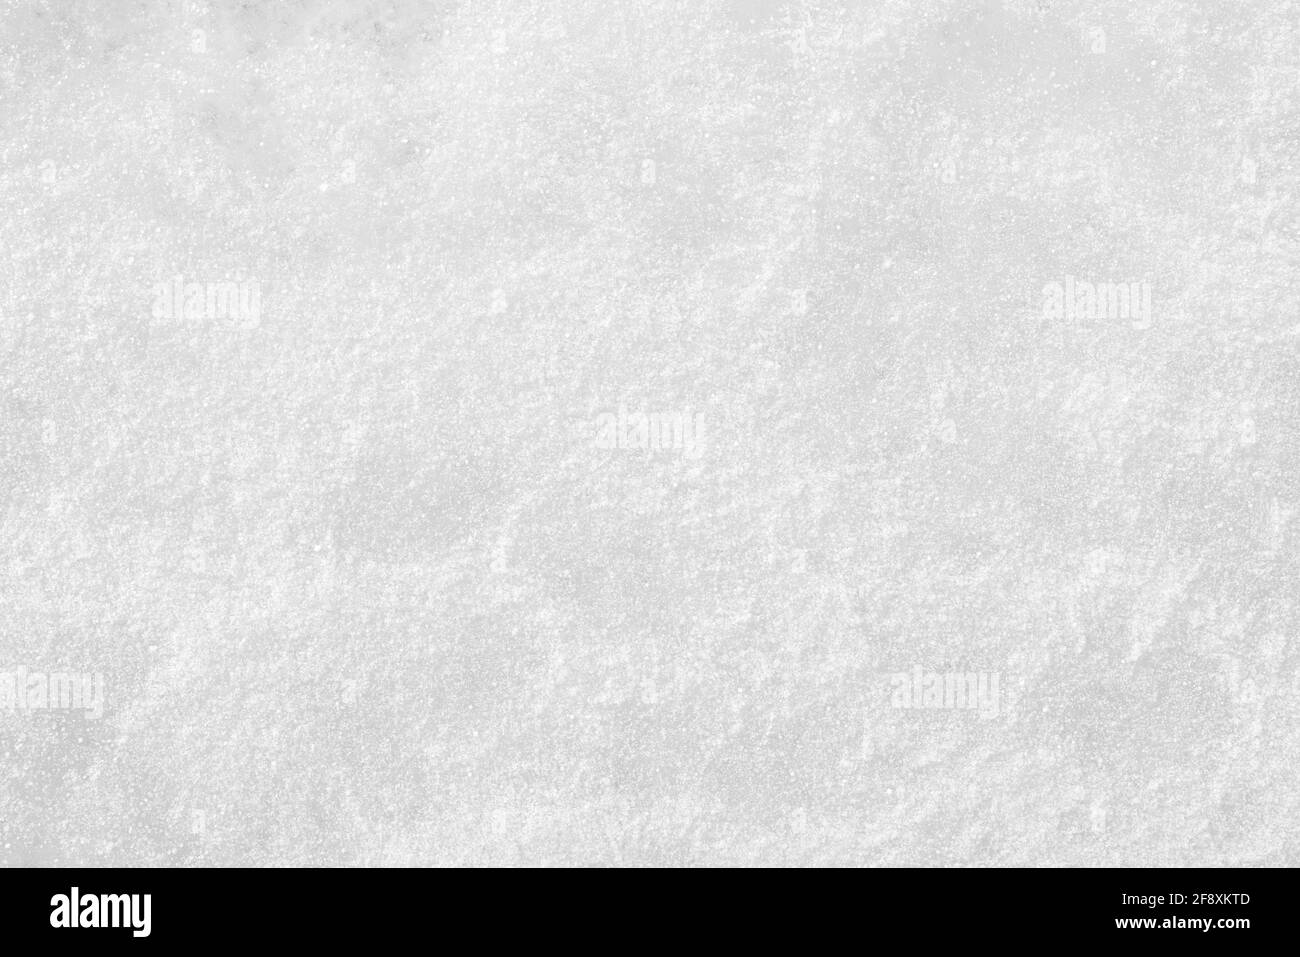 Ice background texture. Frozen water in various geometric abstract shapes. Seasonal natural effect. Cold weather. Stock Photo